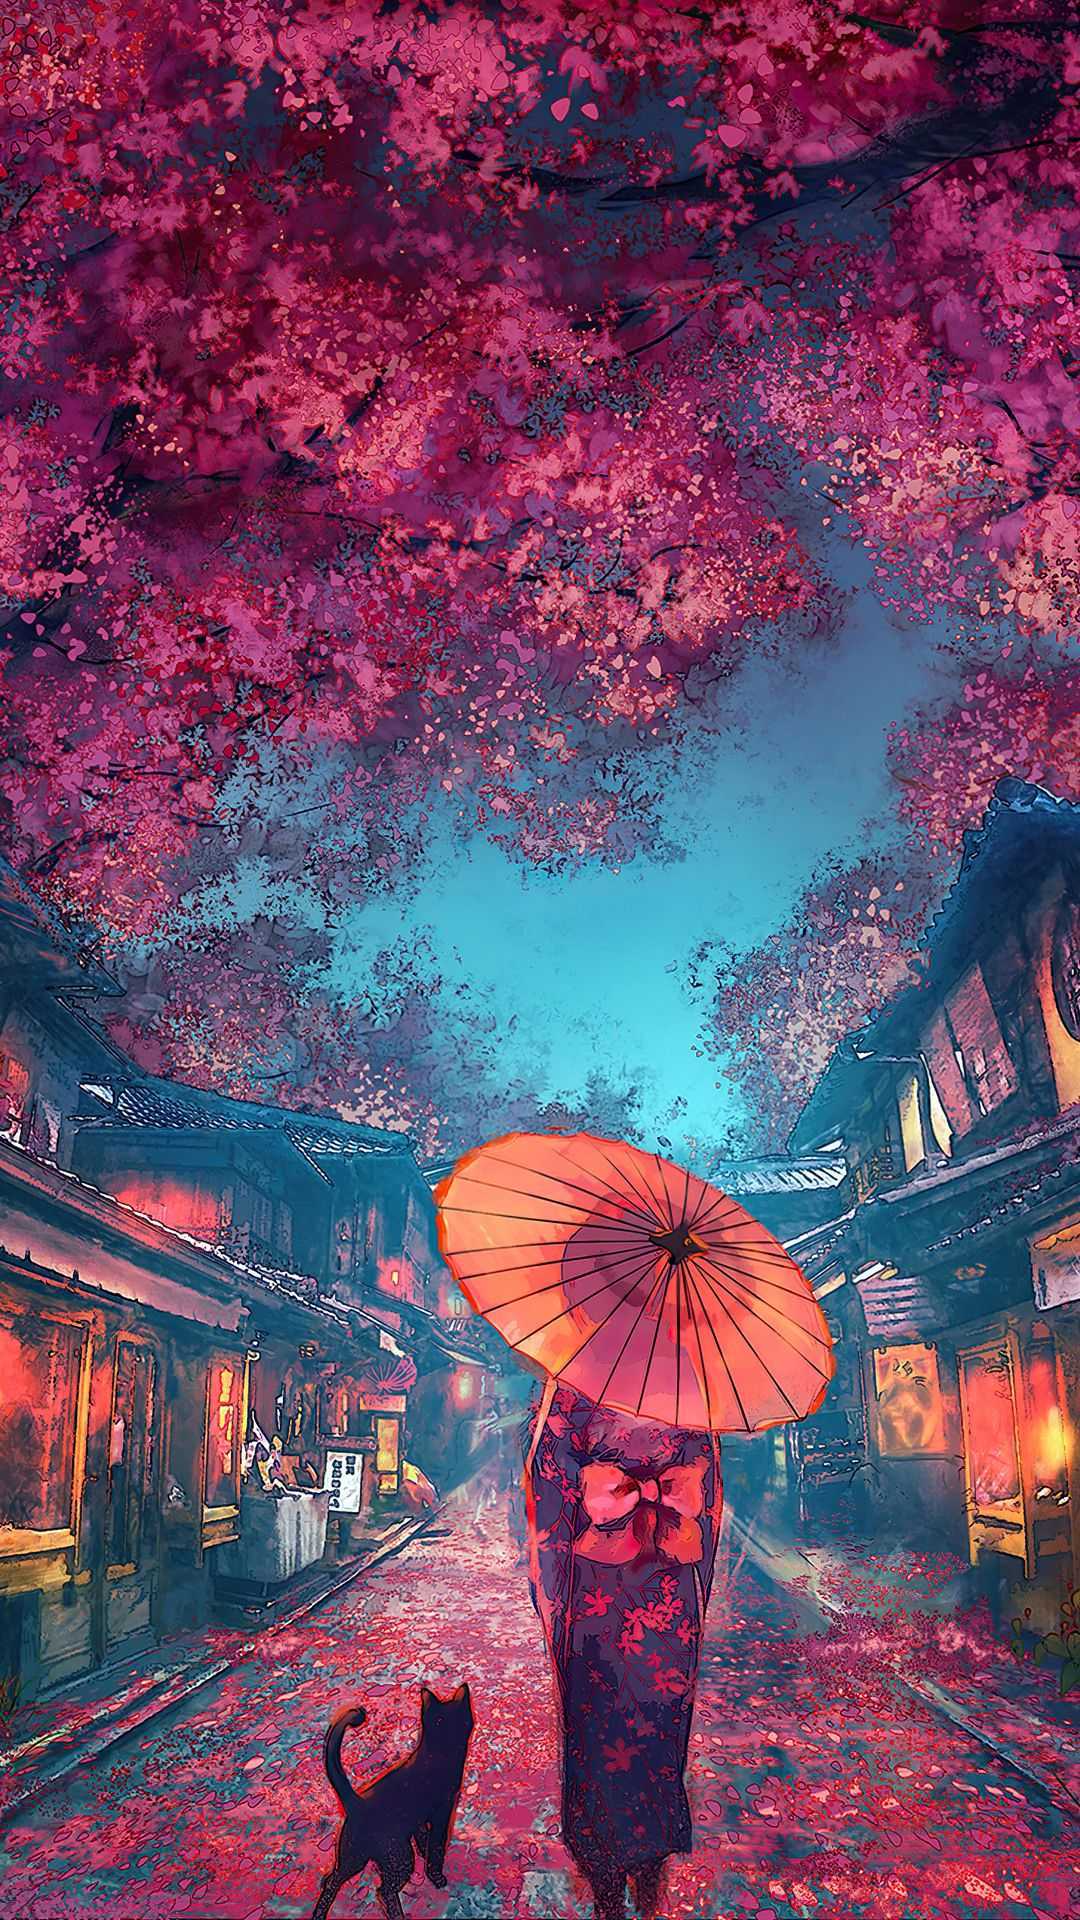 IPhone wallpaper anime girl under the cherry blossom with cat - Tokyo, Japan, Japanese